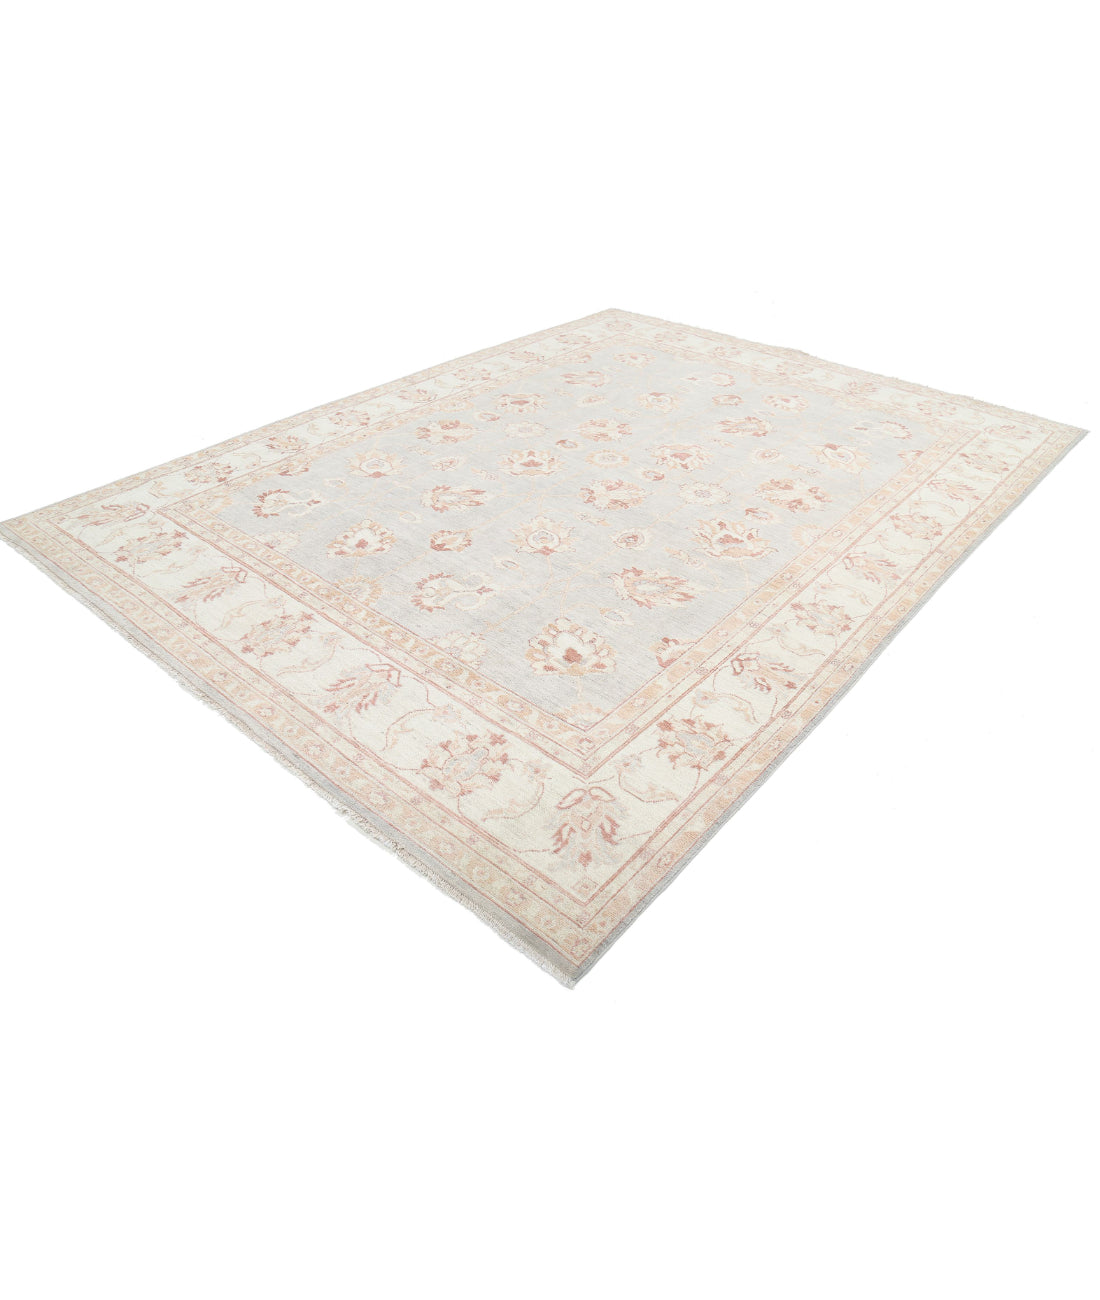 Hand Knotted Serenity Wool Rug - 8'9'' x 11'6'' 8'9'' x 11'6'' (263 X 345) / Grey / Ivory